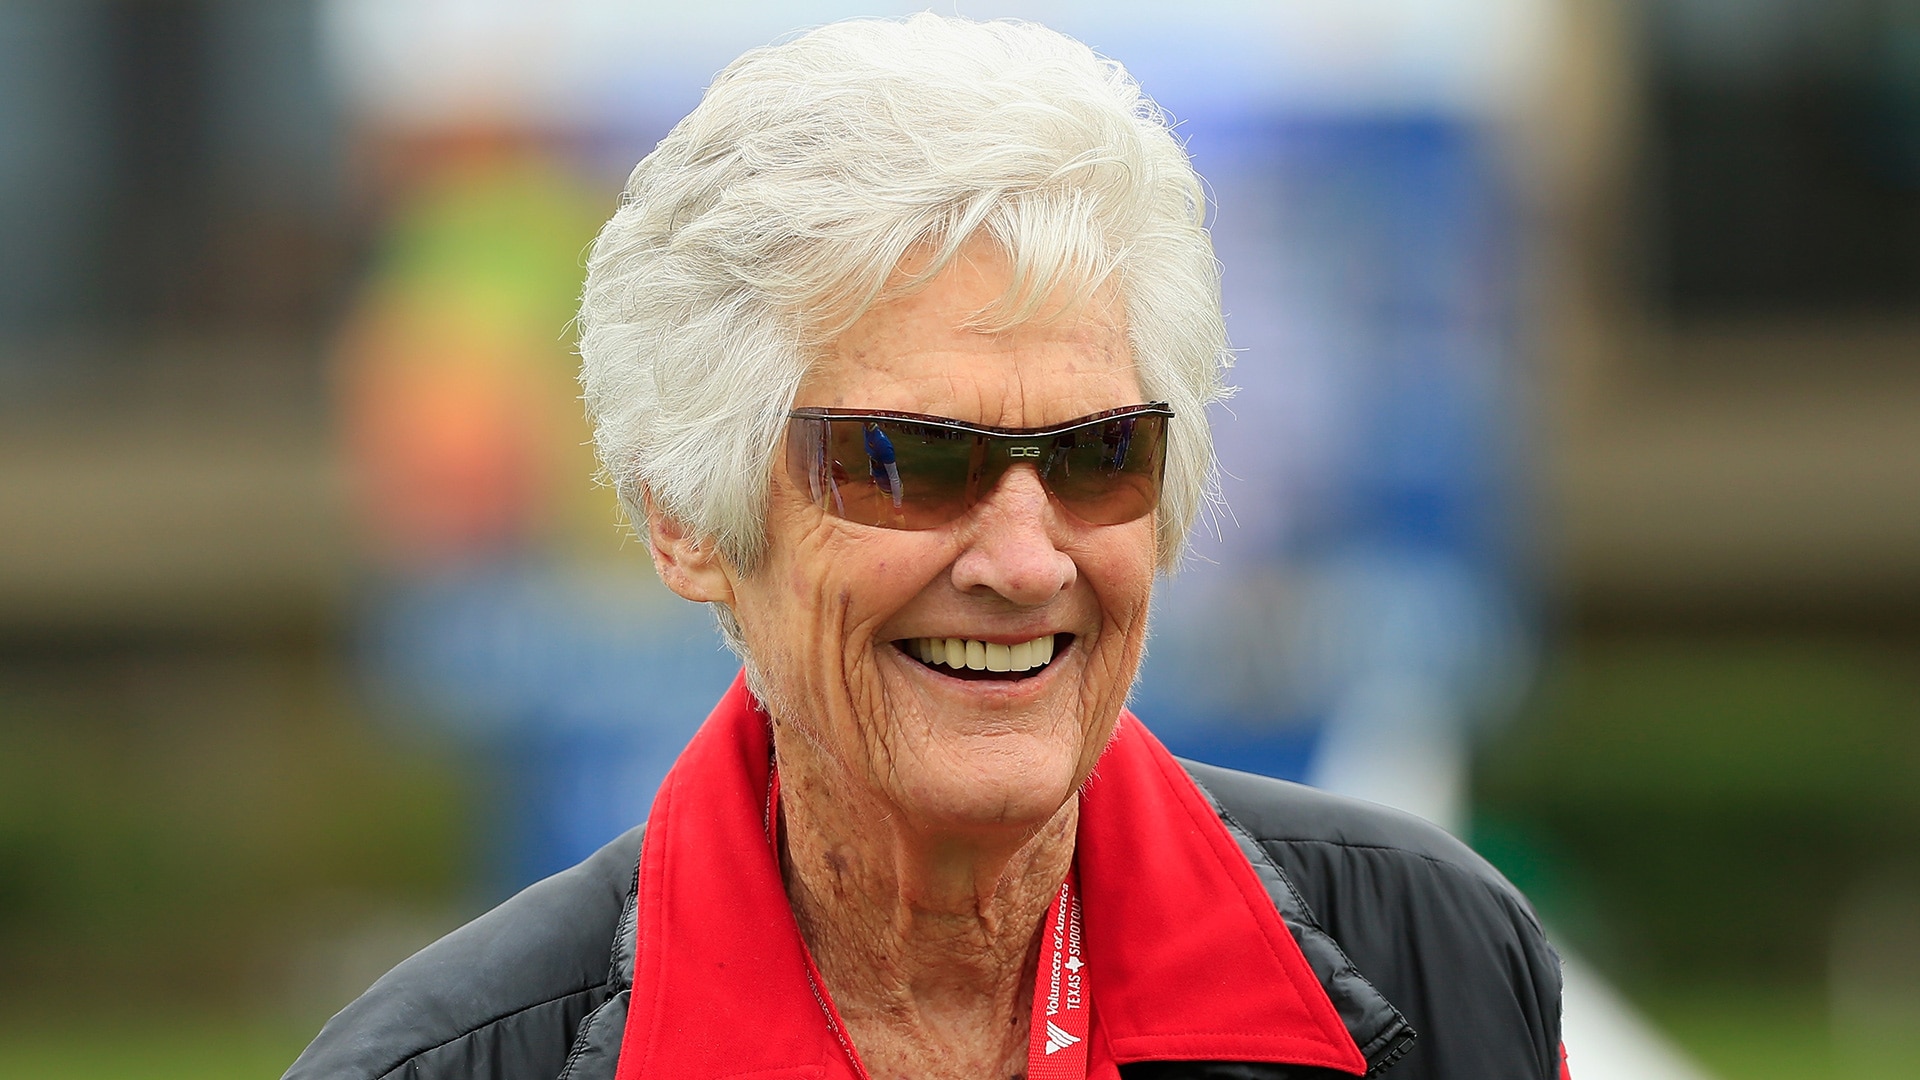 Kathy Whitworth, the winningest player on the LPGA and PGA tours, dies at 83